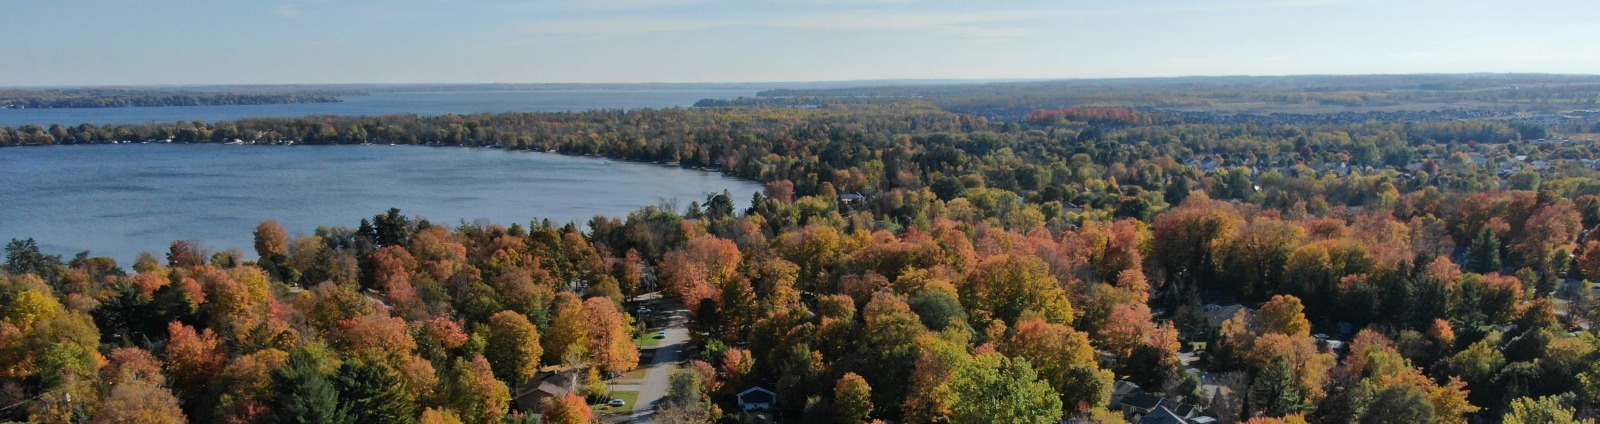 Aerial view of road leading to Innisfil Beach Park lake